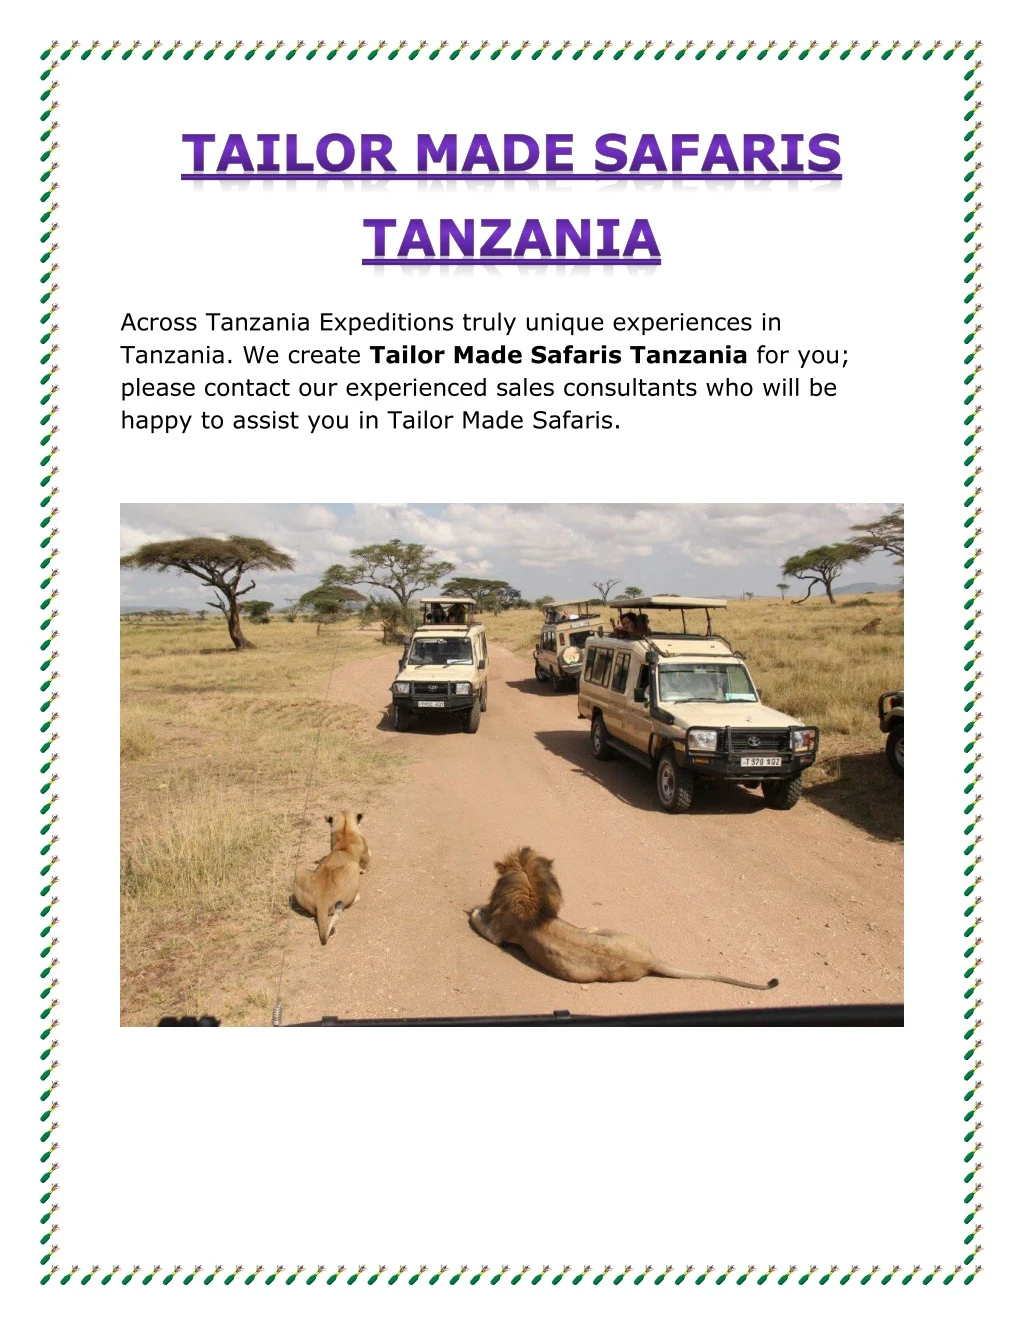 across tanzania expeditions truly unique